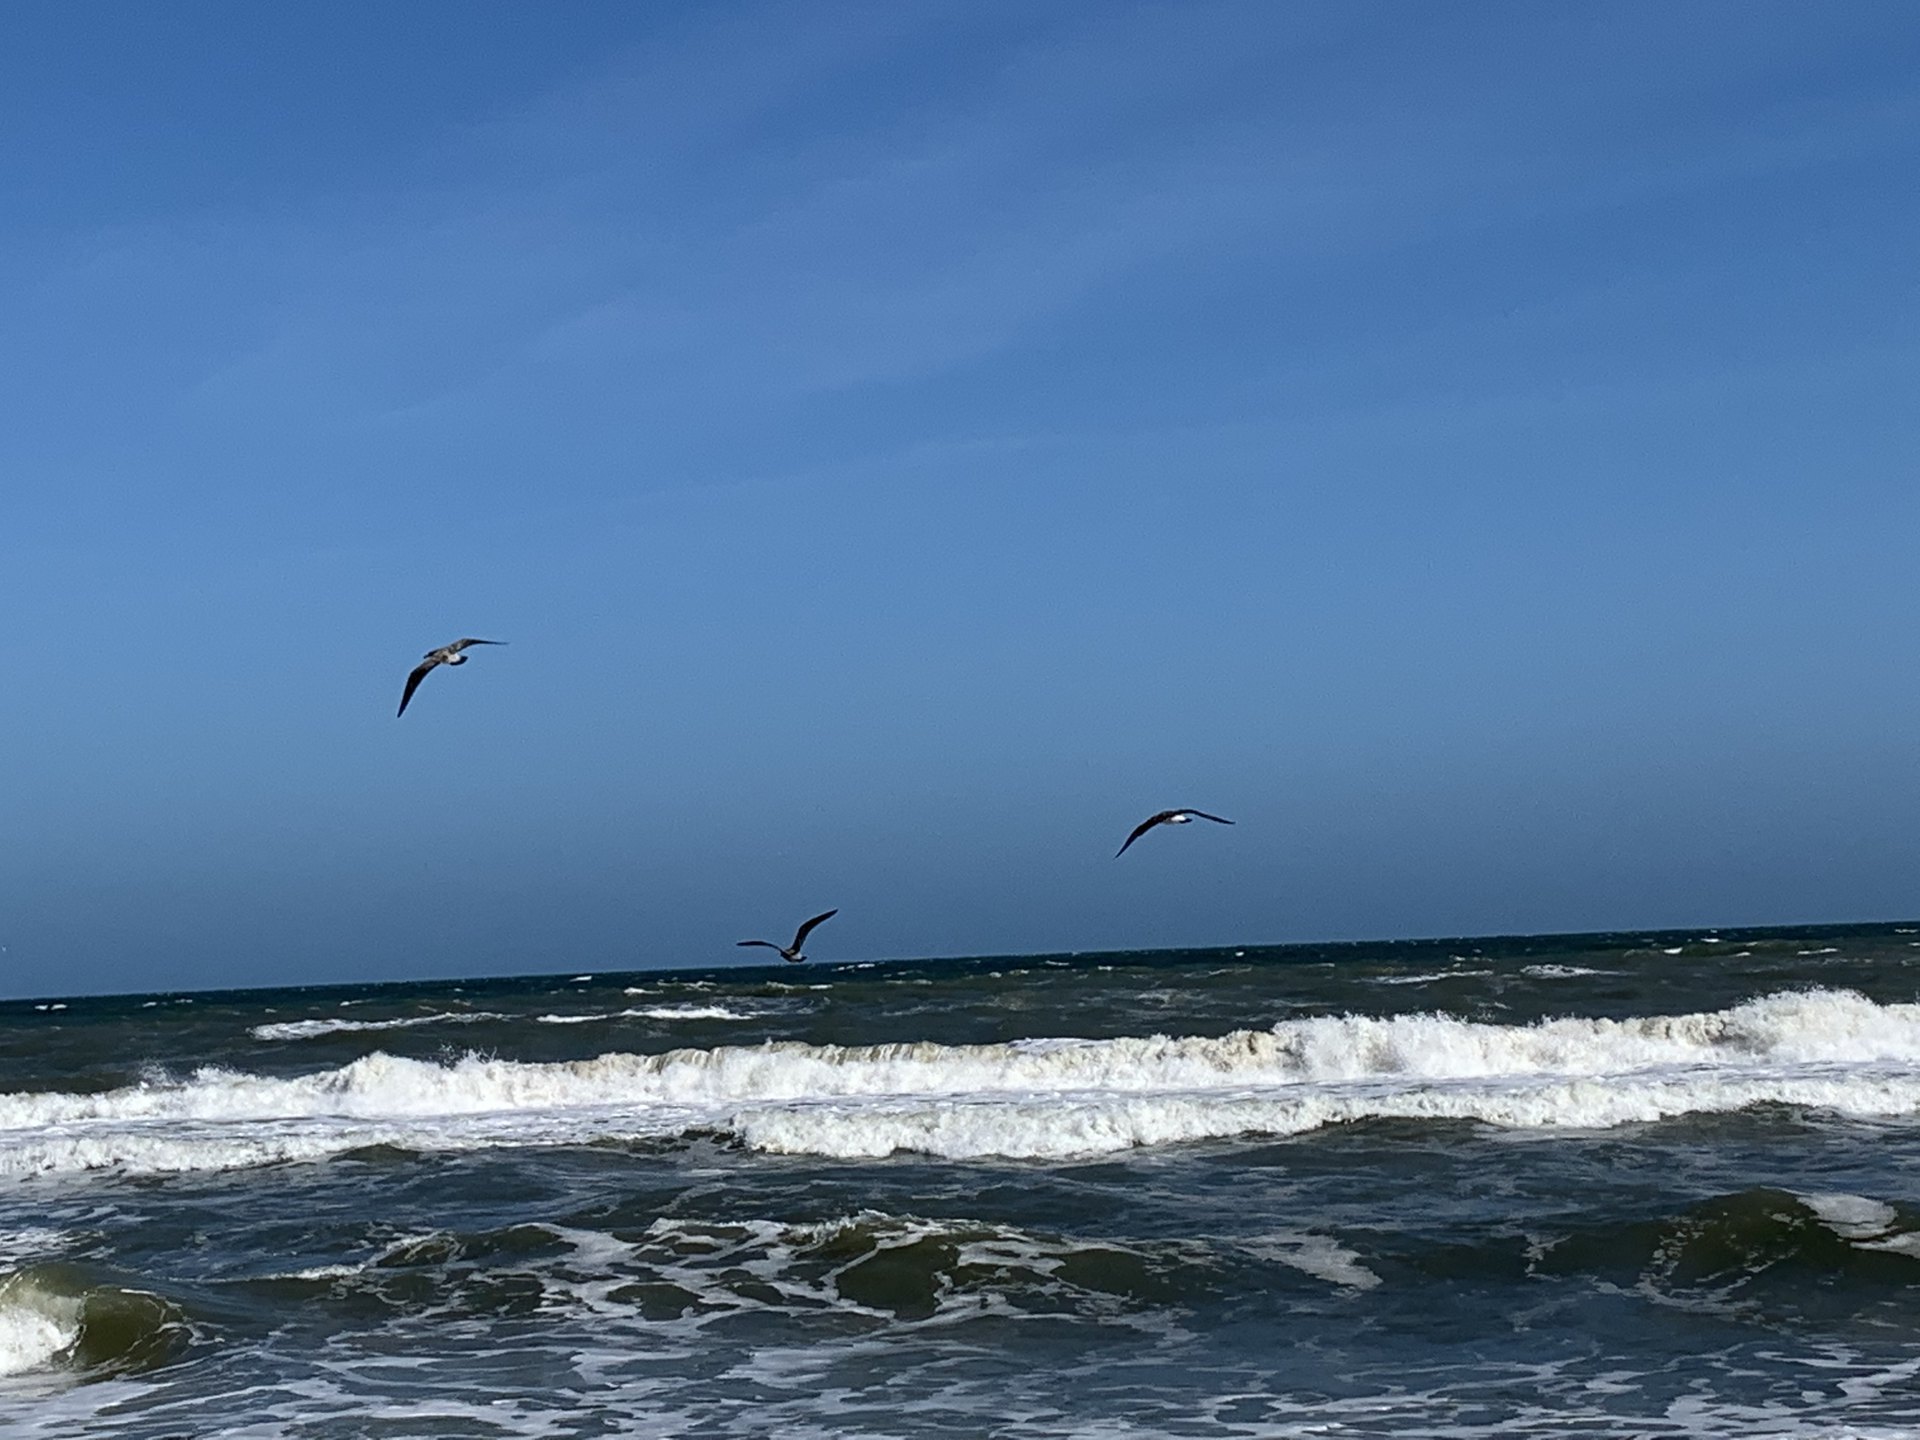 James 1 NASB.  Two seagulls hovering above the ocean with sunny blue skies above.